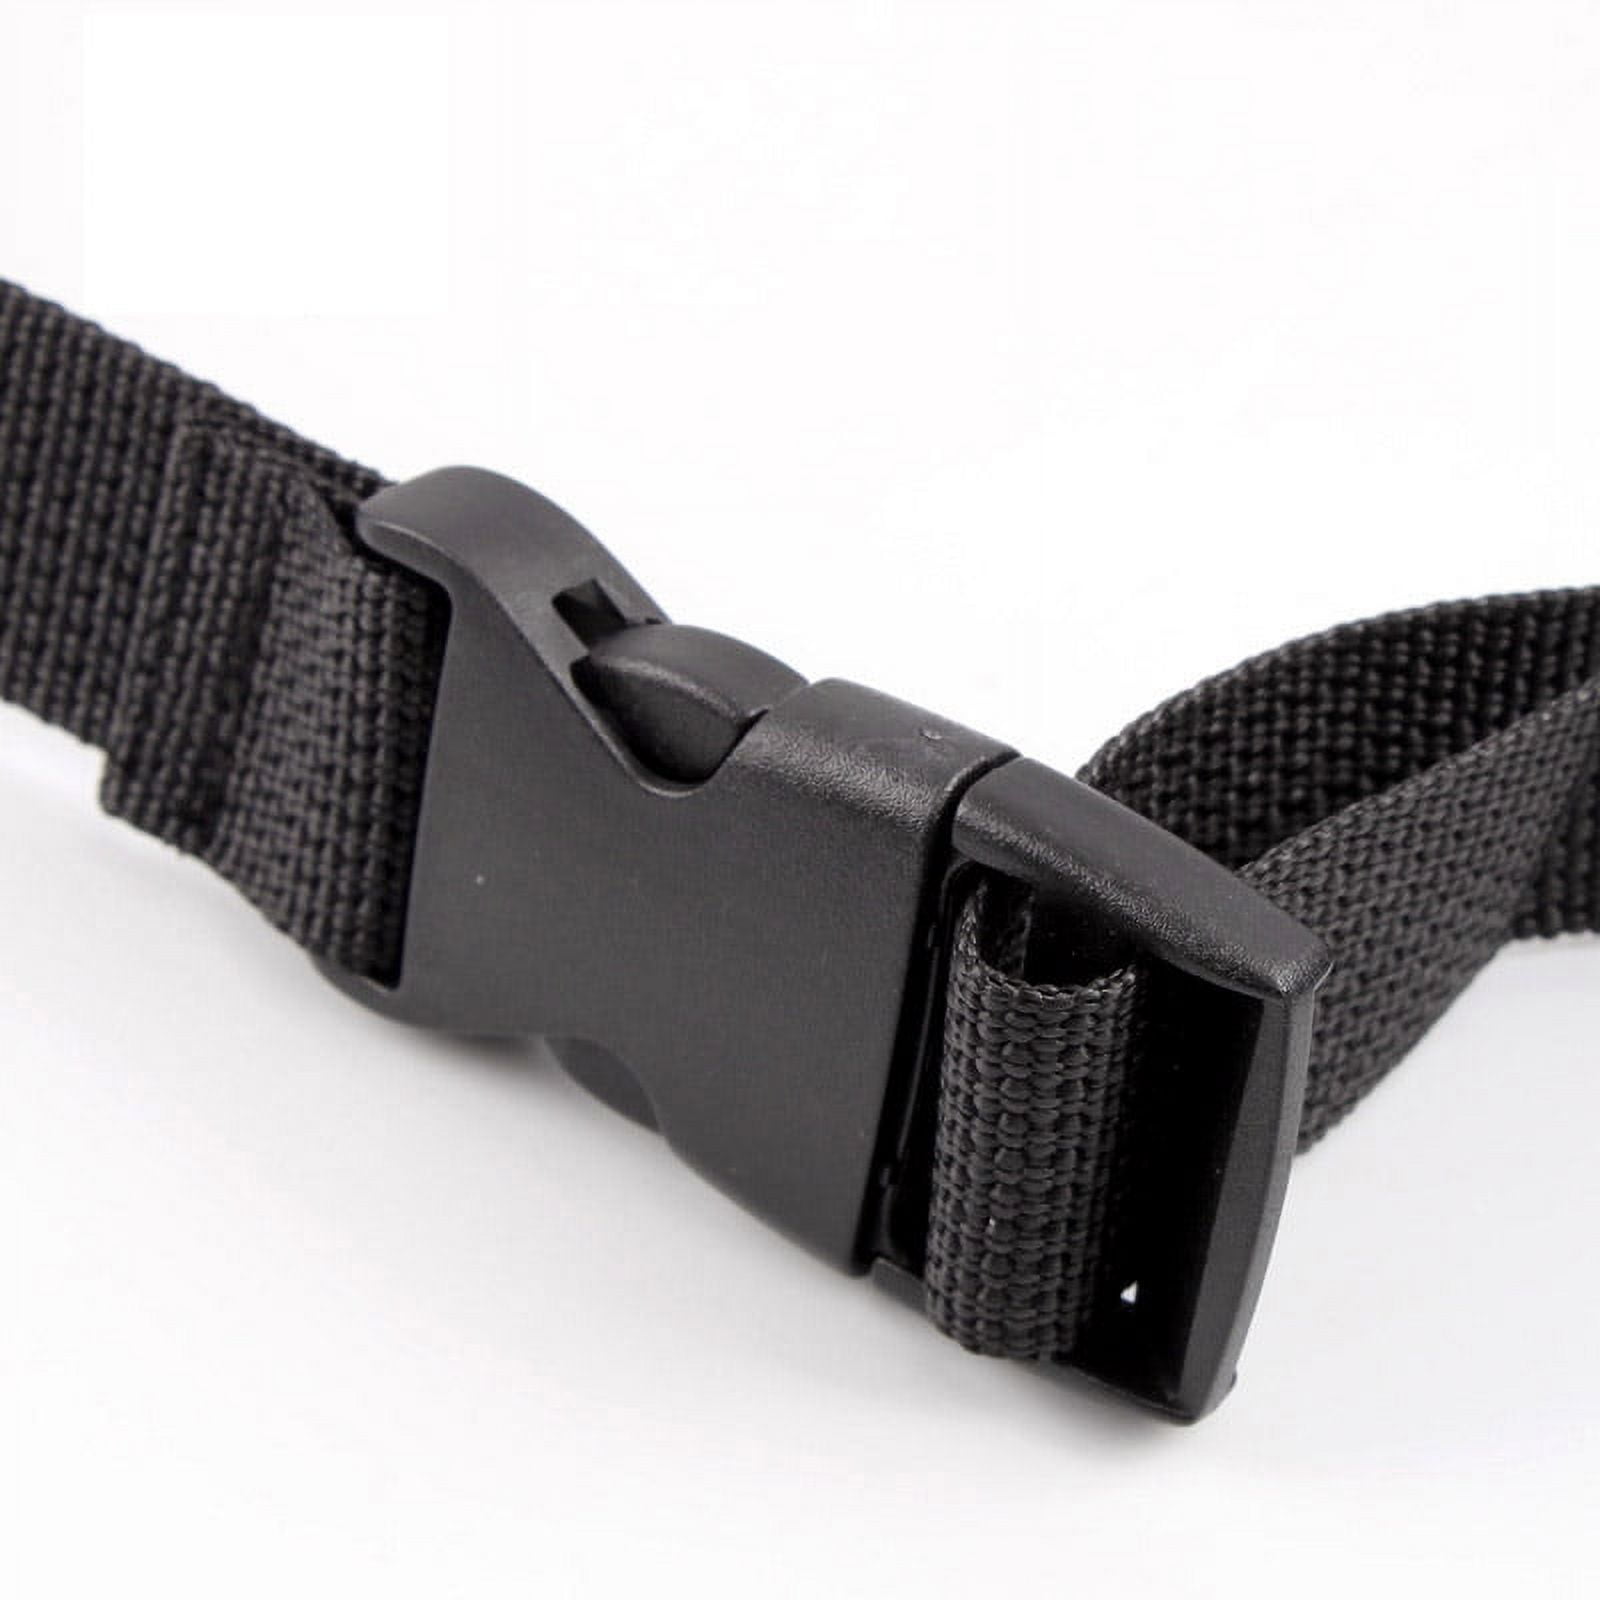 Ayaport Utility Straps with Buckle 40 Quick-Release Adjustable Nylon  Straps Black 4 Pack